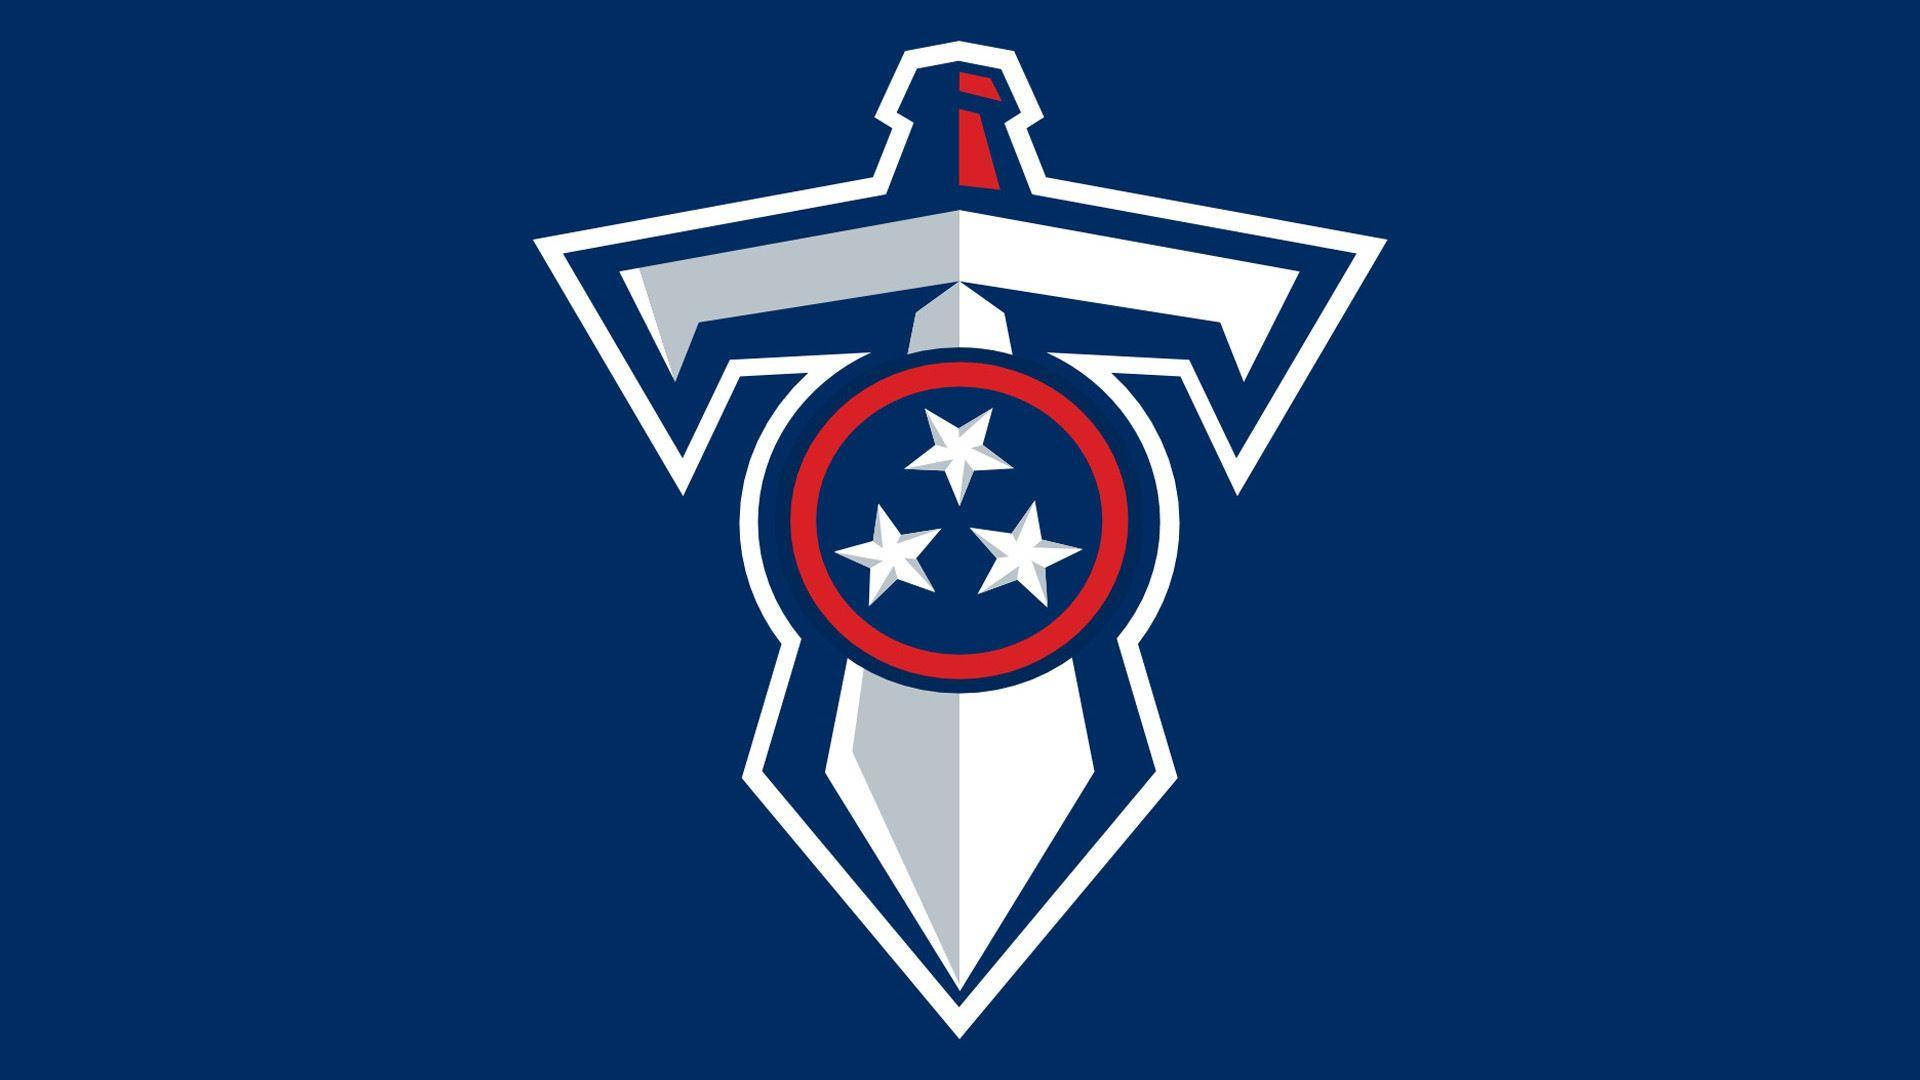 Exciting Football Game - Tennessee Titans In Action